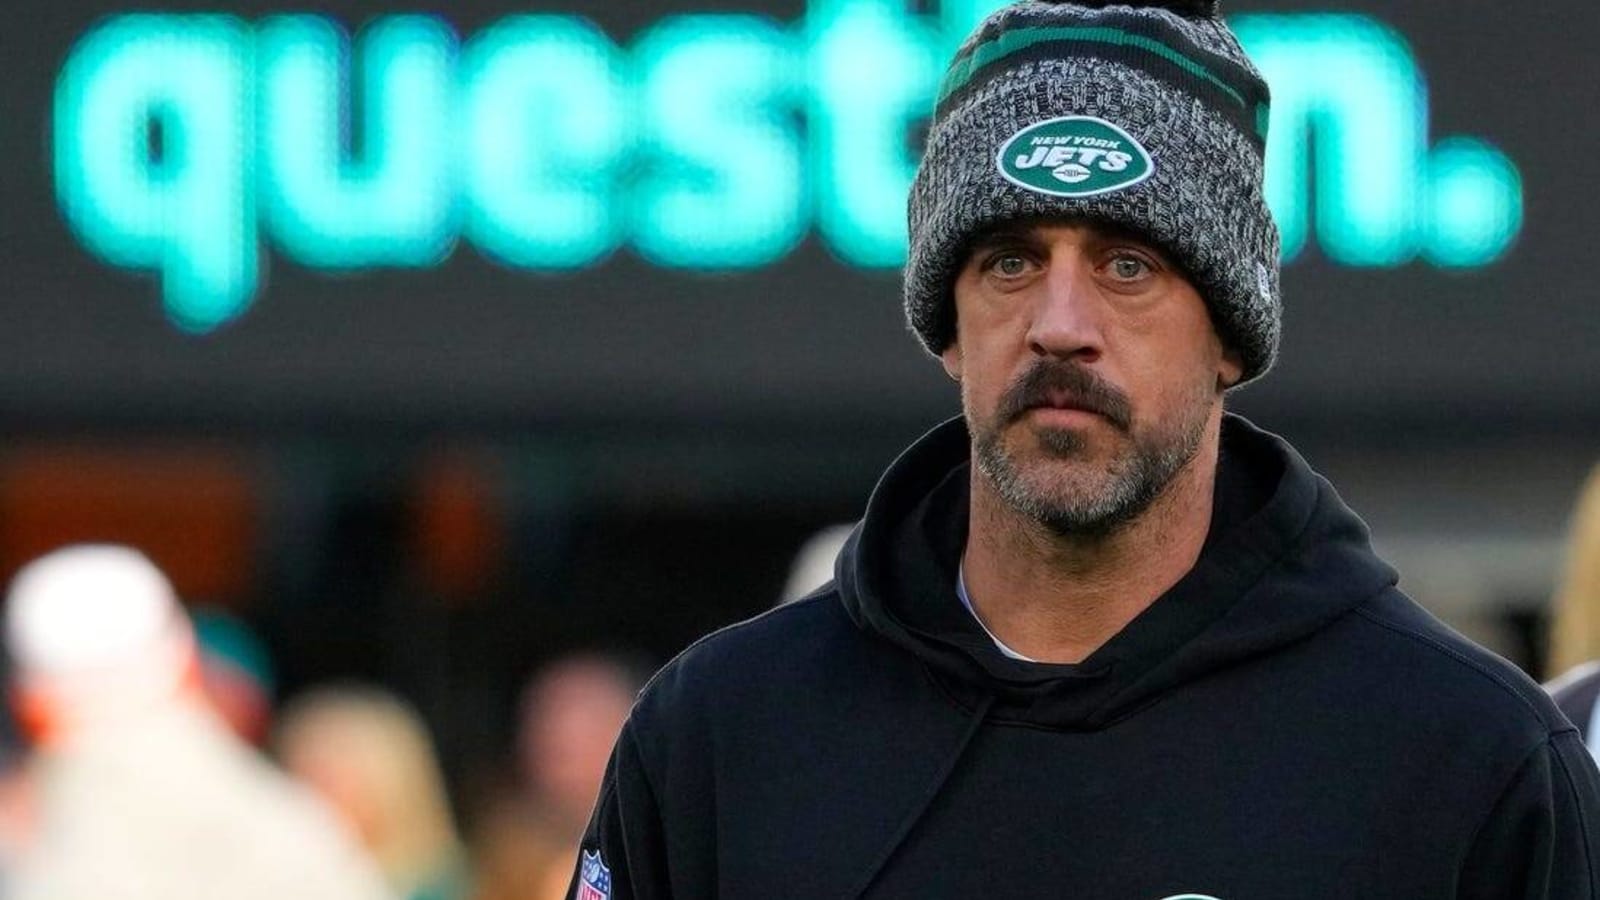 Oh, snap: Jets, Aaron Rodgers open on MNF again